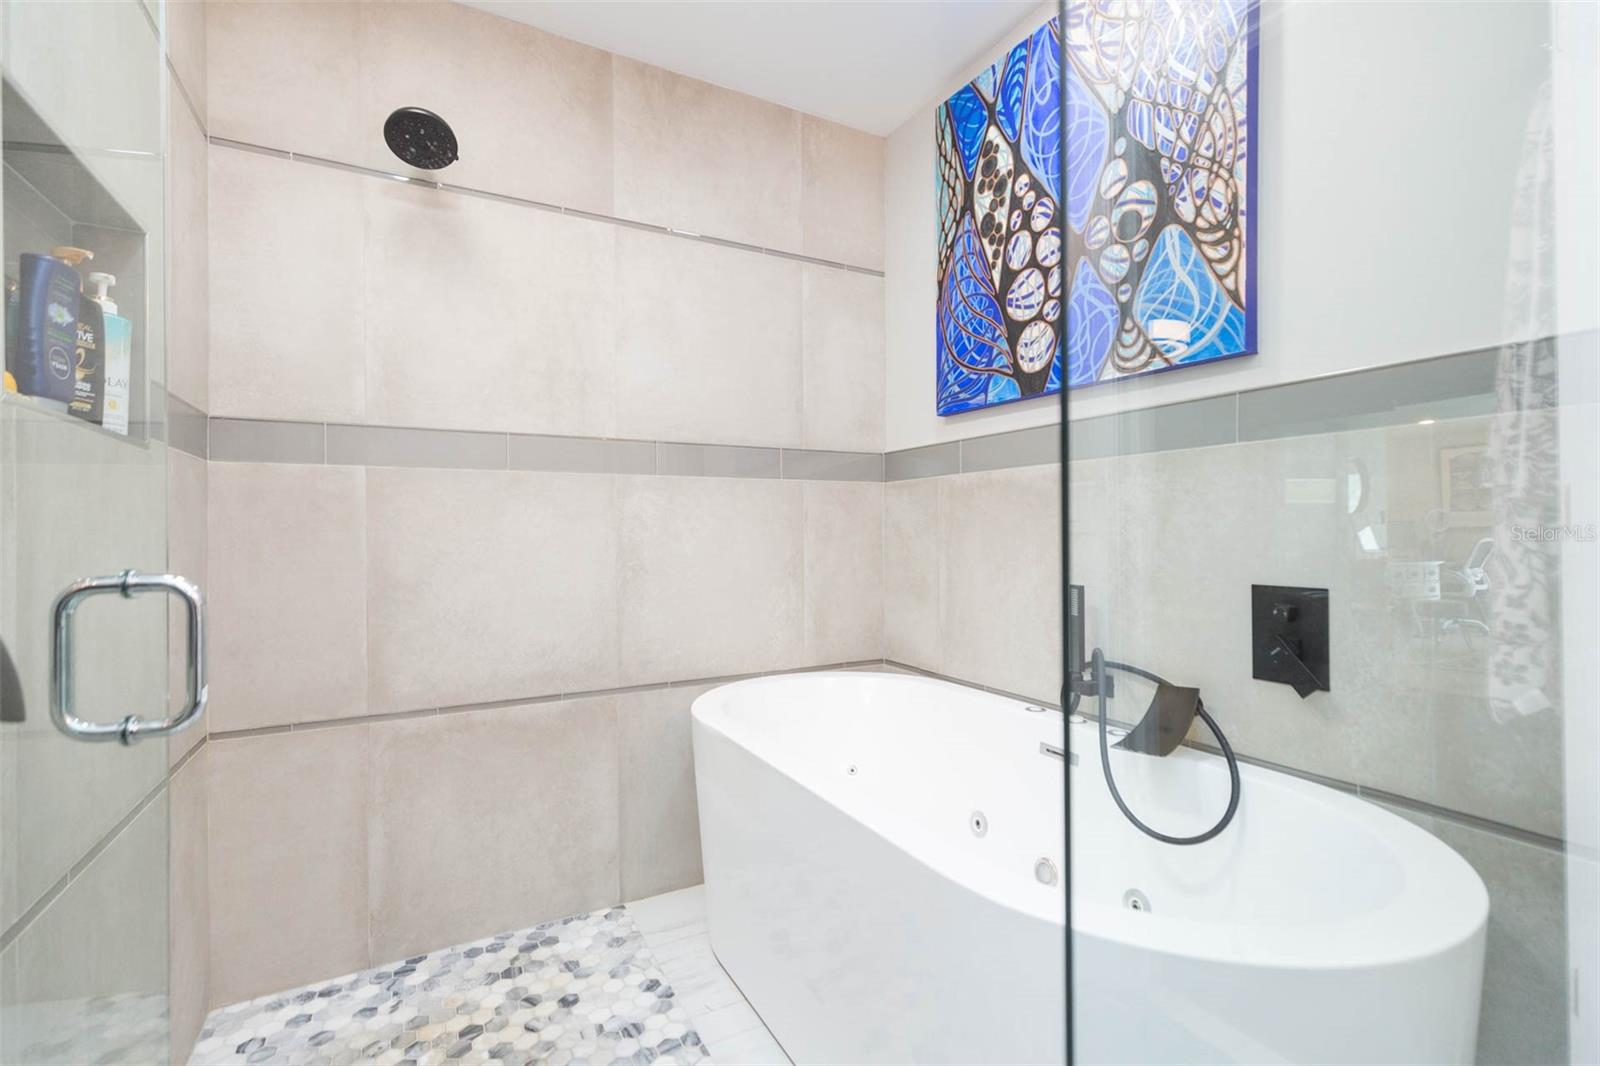 Primary ensuite has been fully renovated and includes shower with large jacuzzi tub.